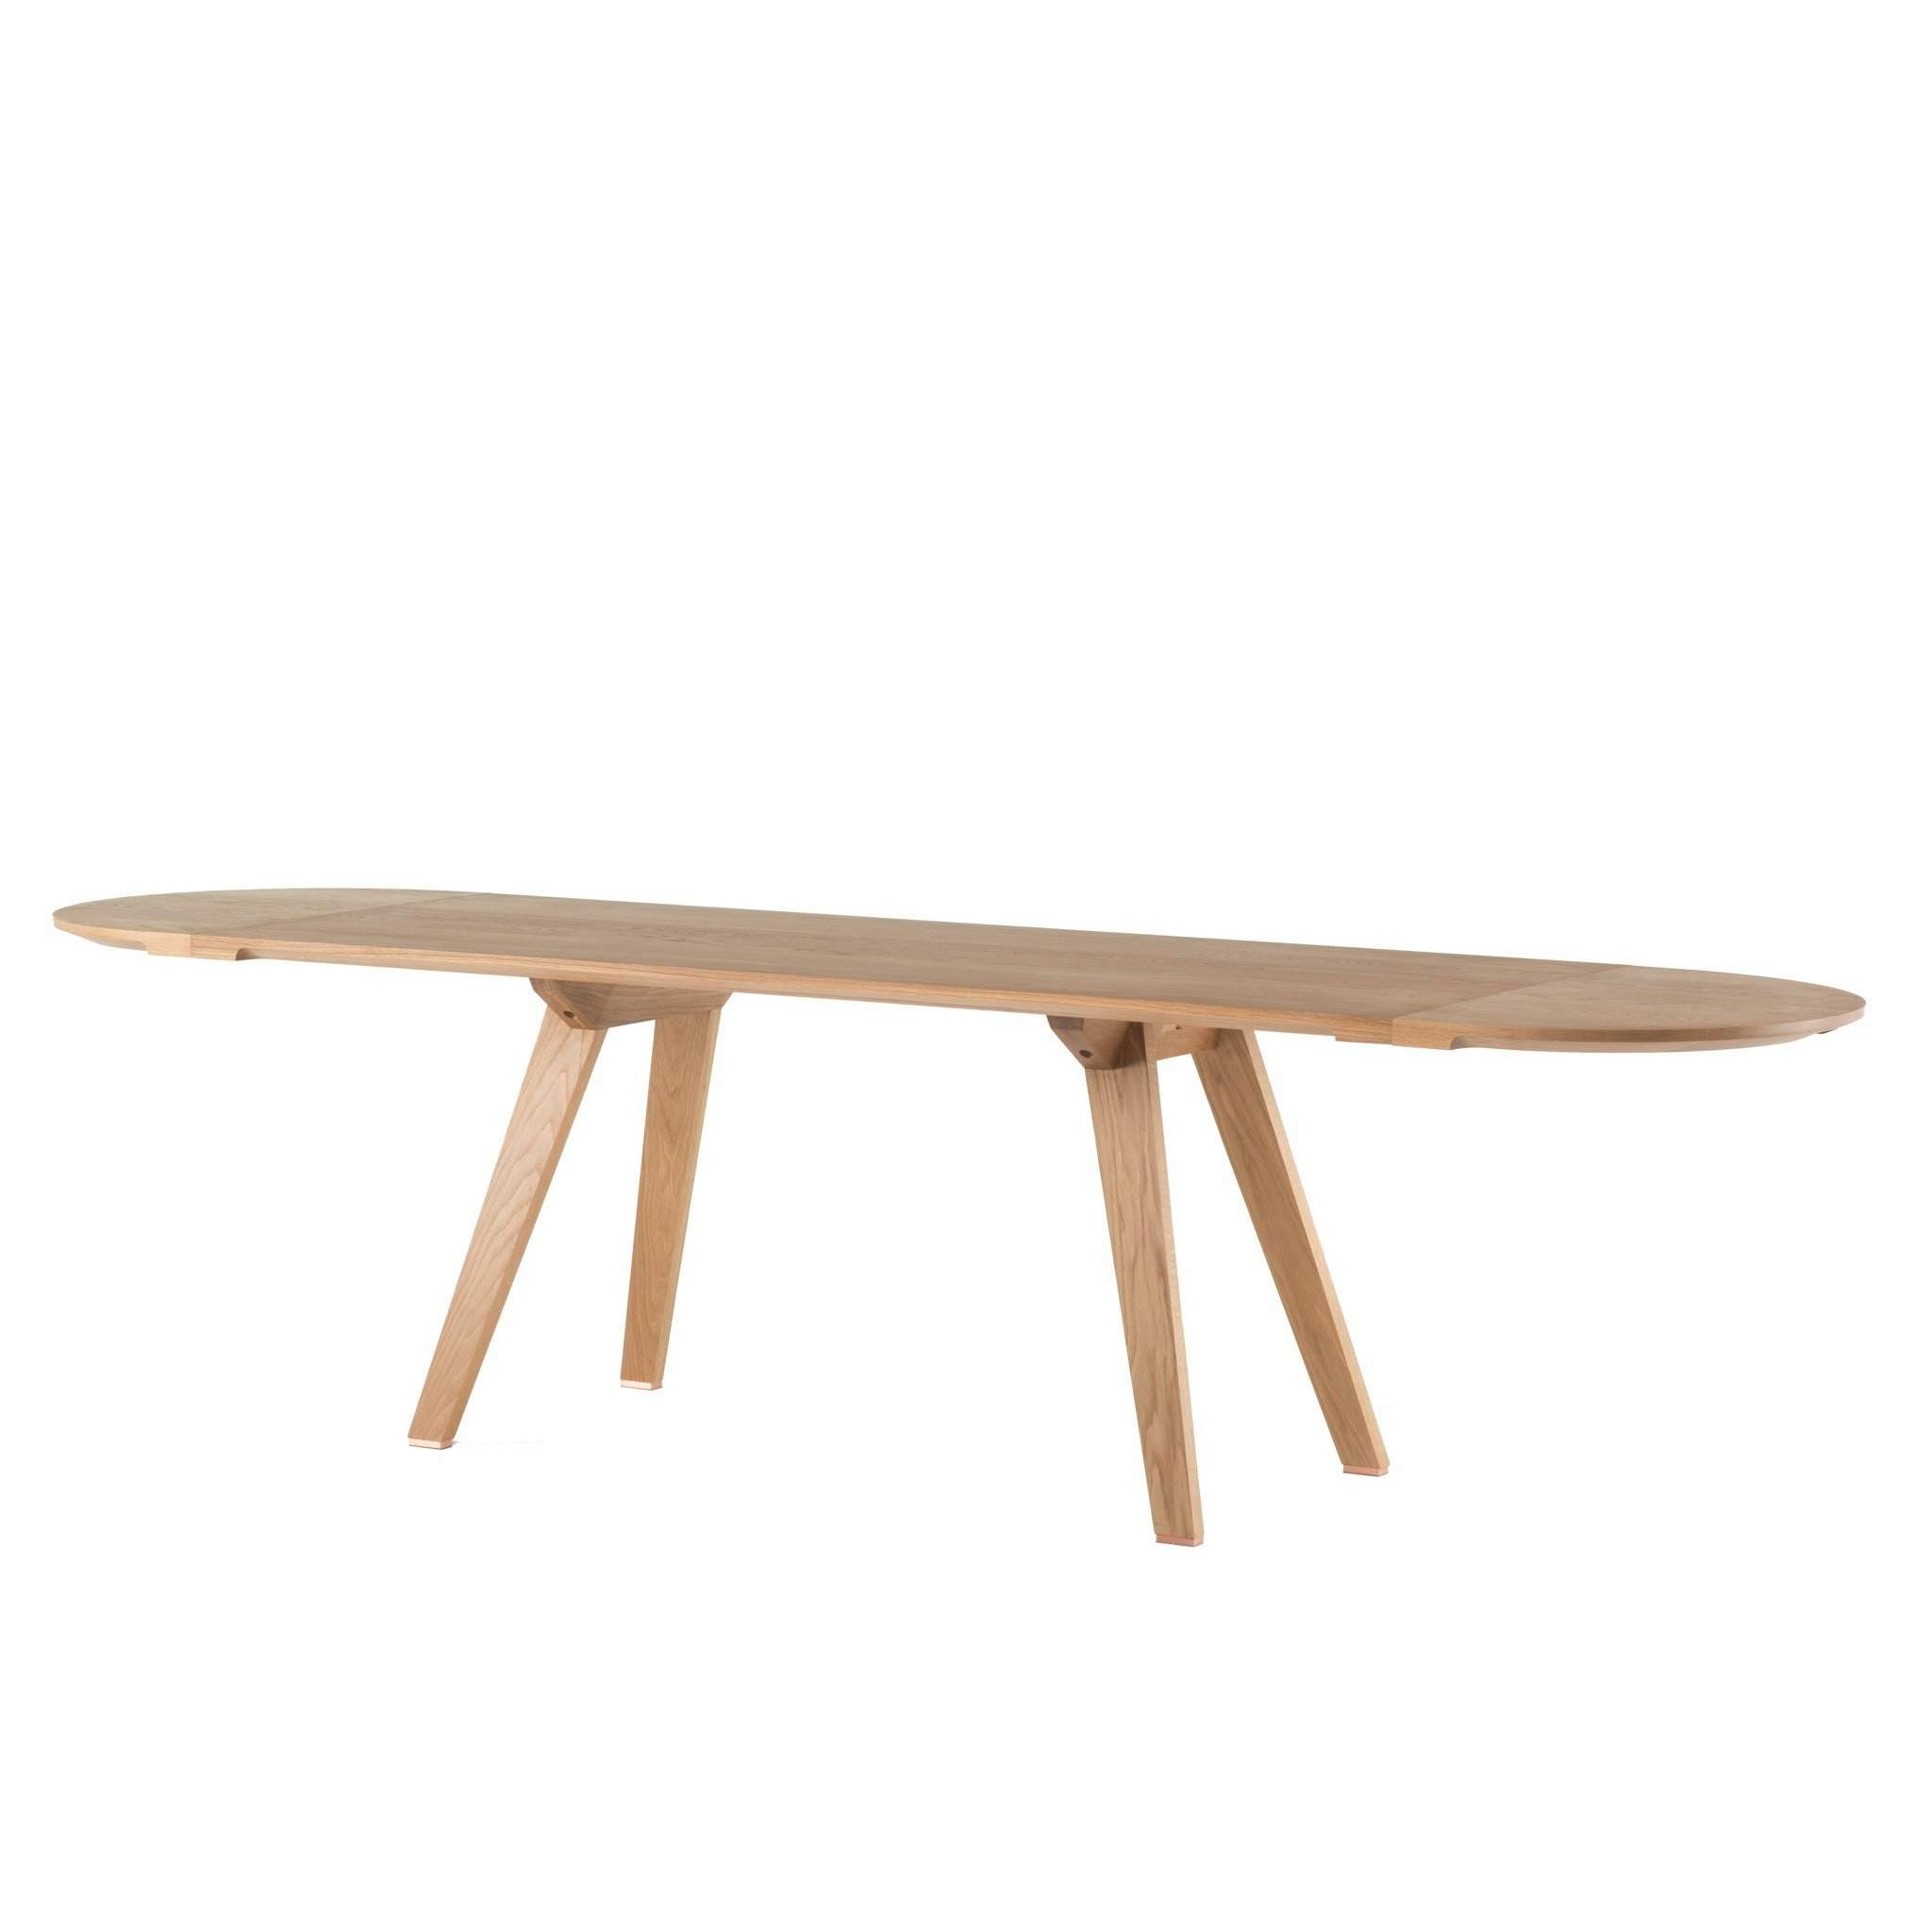 Together Extending Table by Ilse Crawford